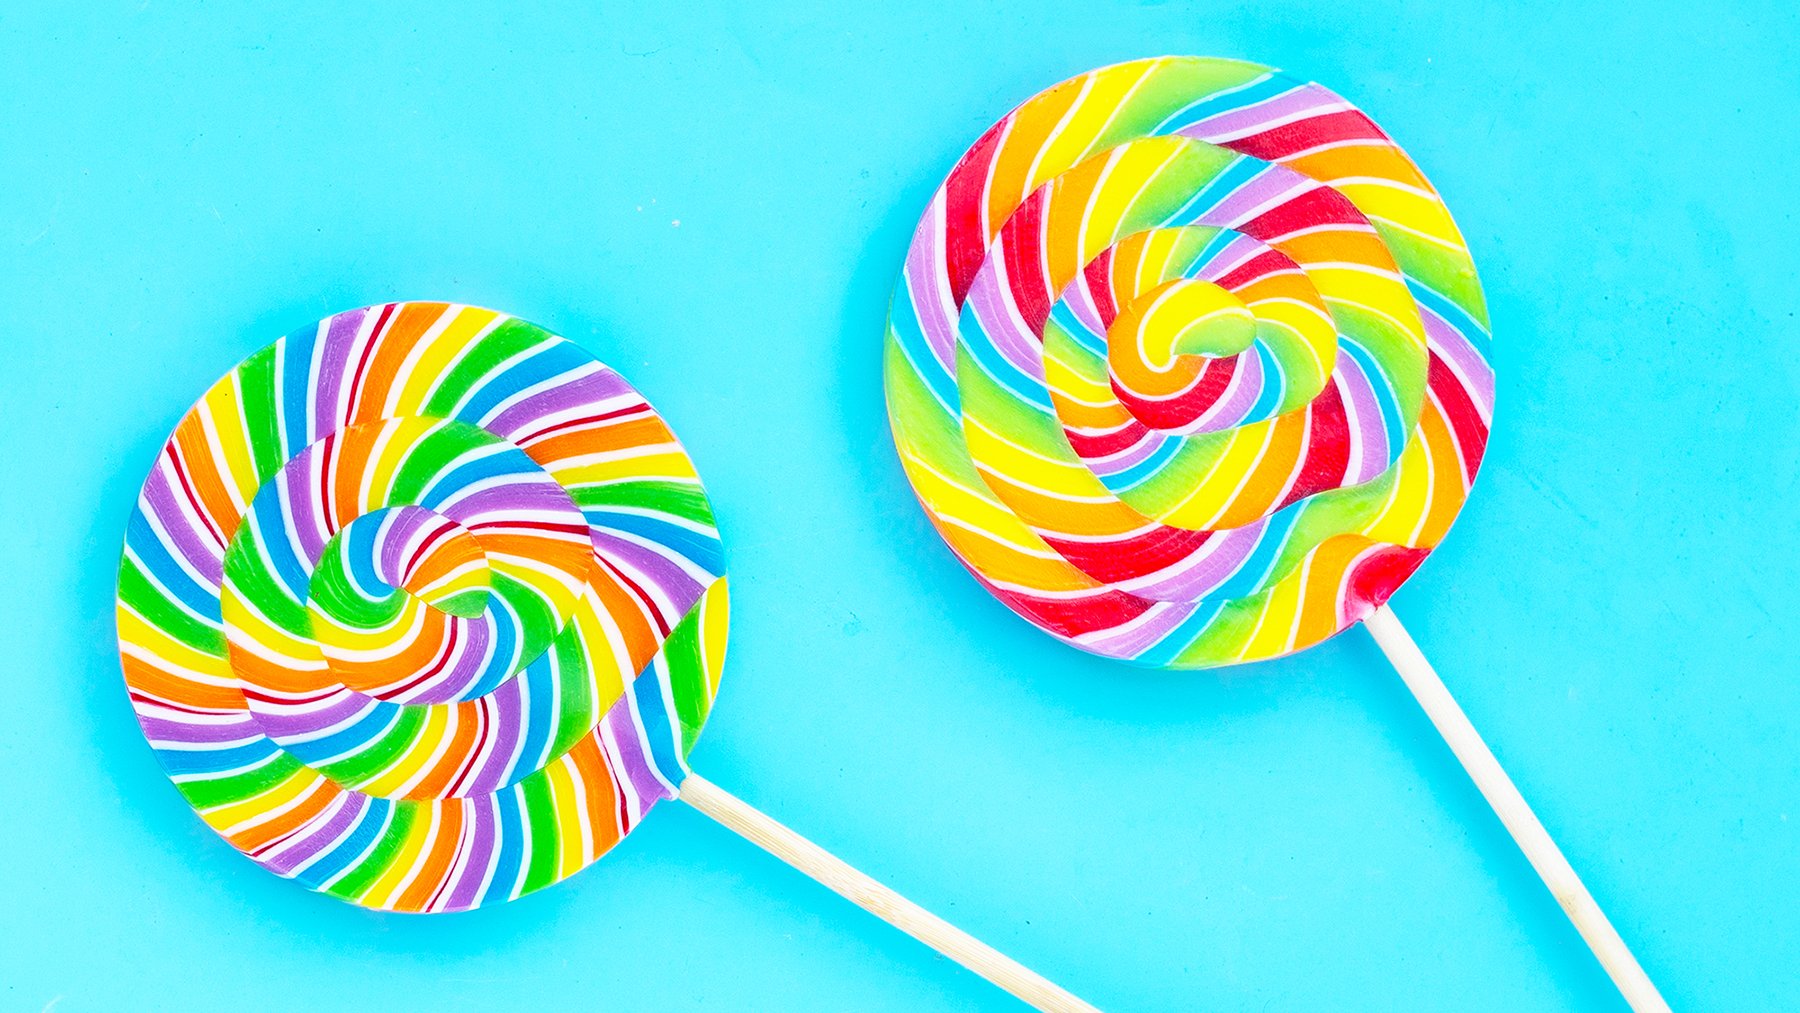 lollipop candy spiral sweets